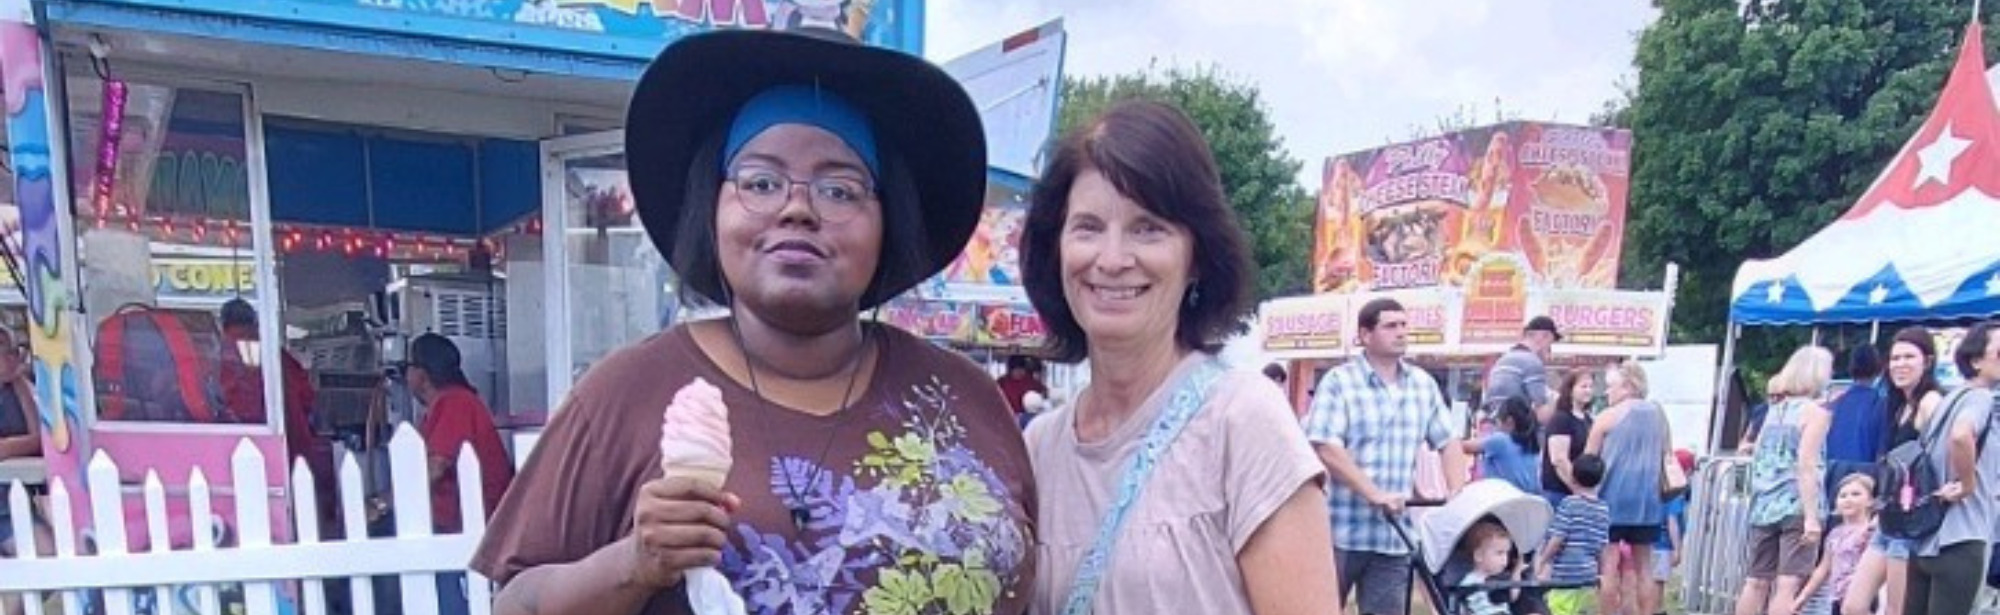 two people at an outdoor fair, one is holding ice cream